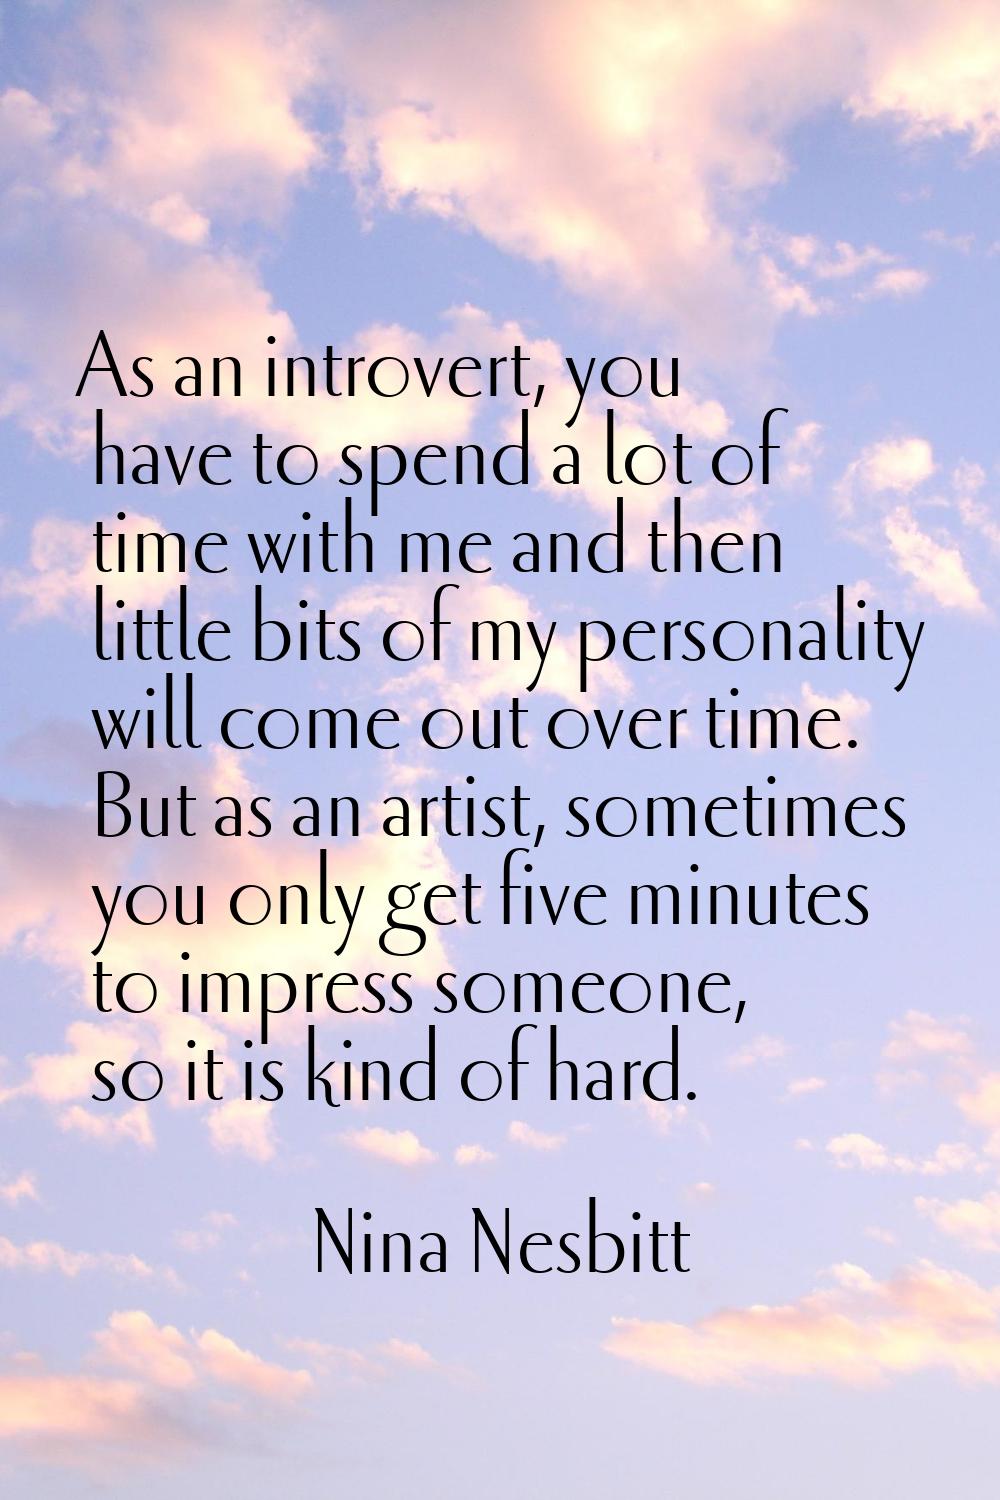 As an introvert, you have to spend a lot of time with me and then little bits of my personality wil